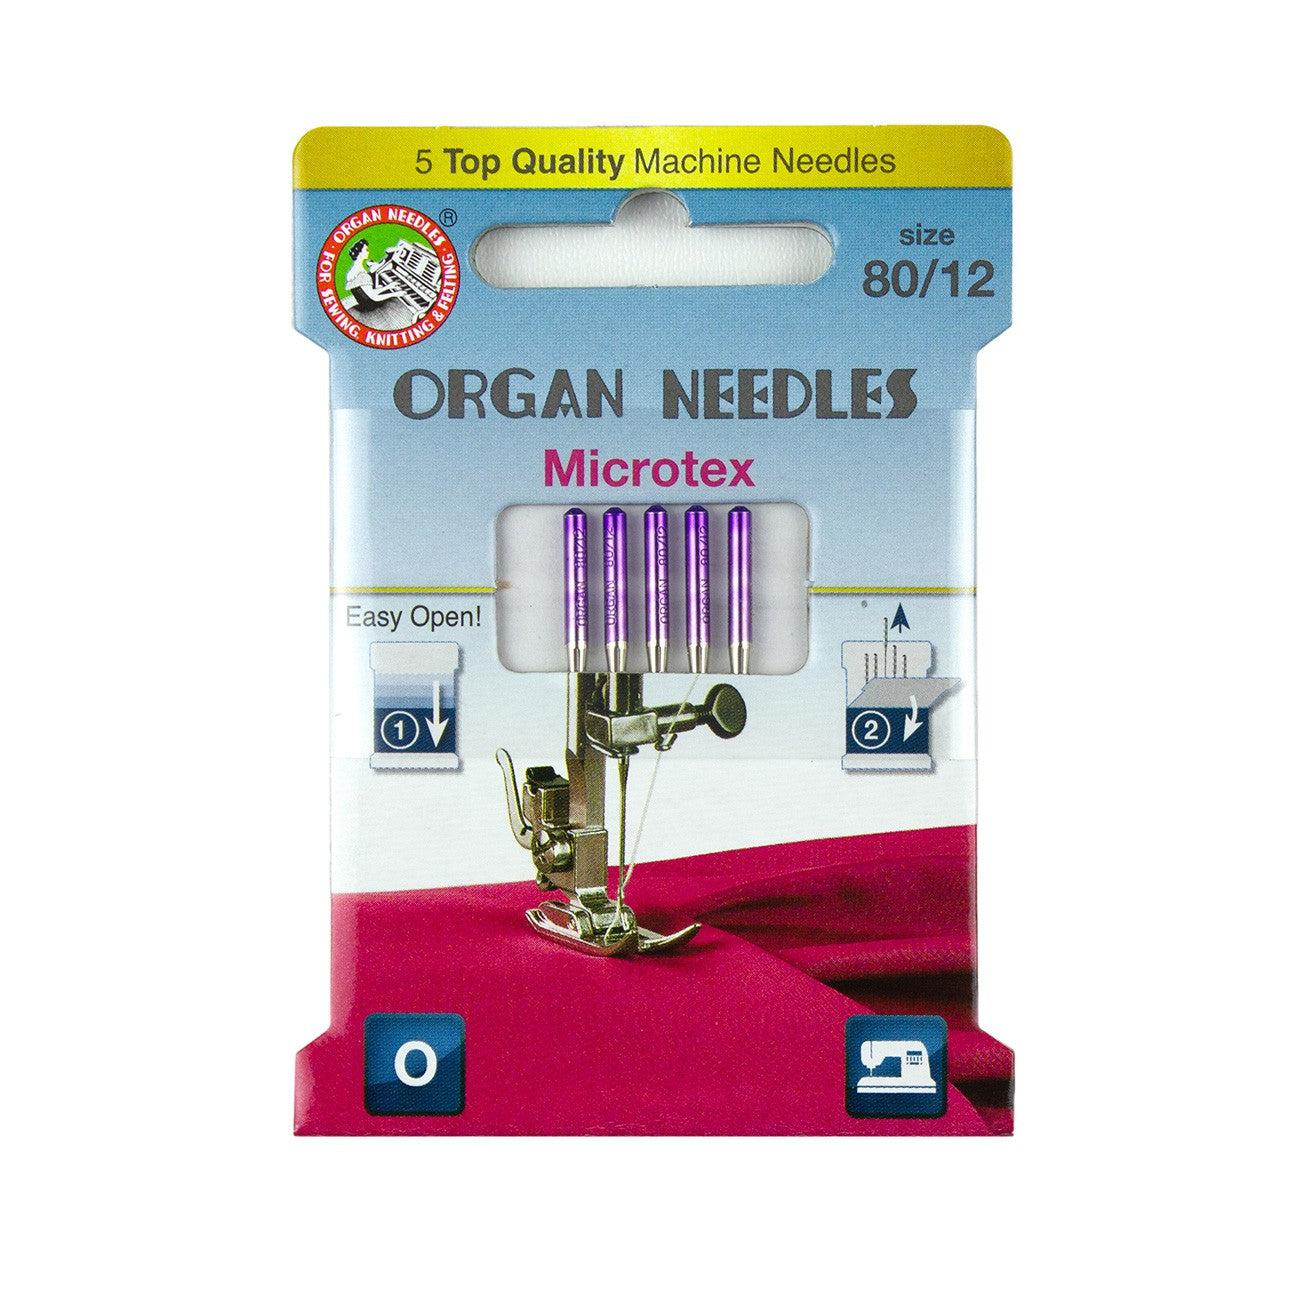 Organ Needles Microtex Size 80/12 Eco Pack-Organ Needles-My Favorite Quilt Store